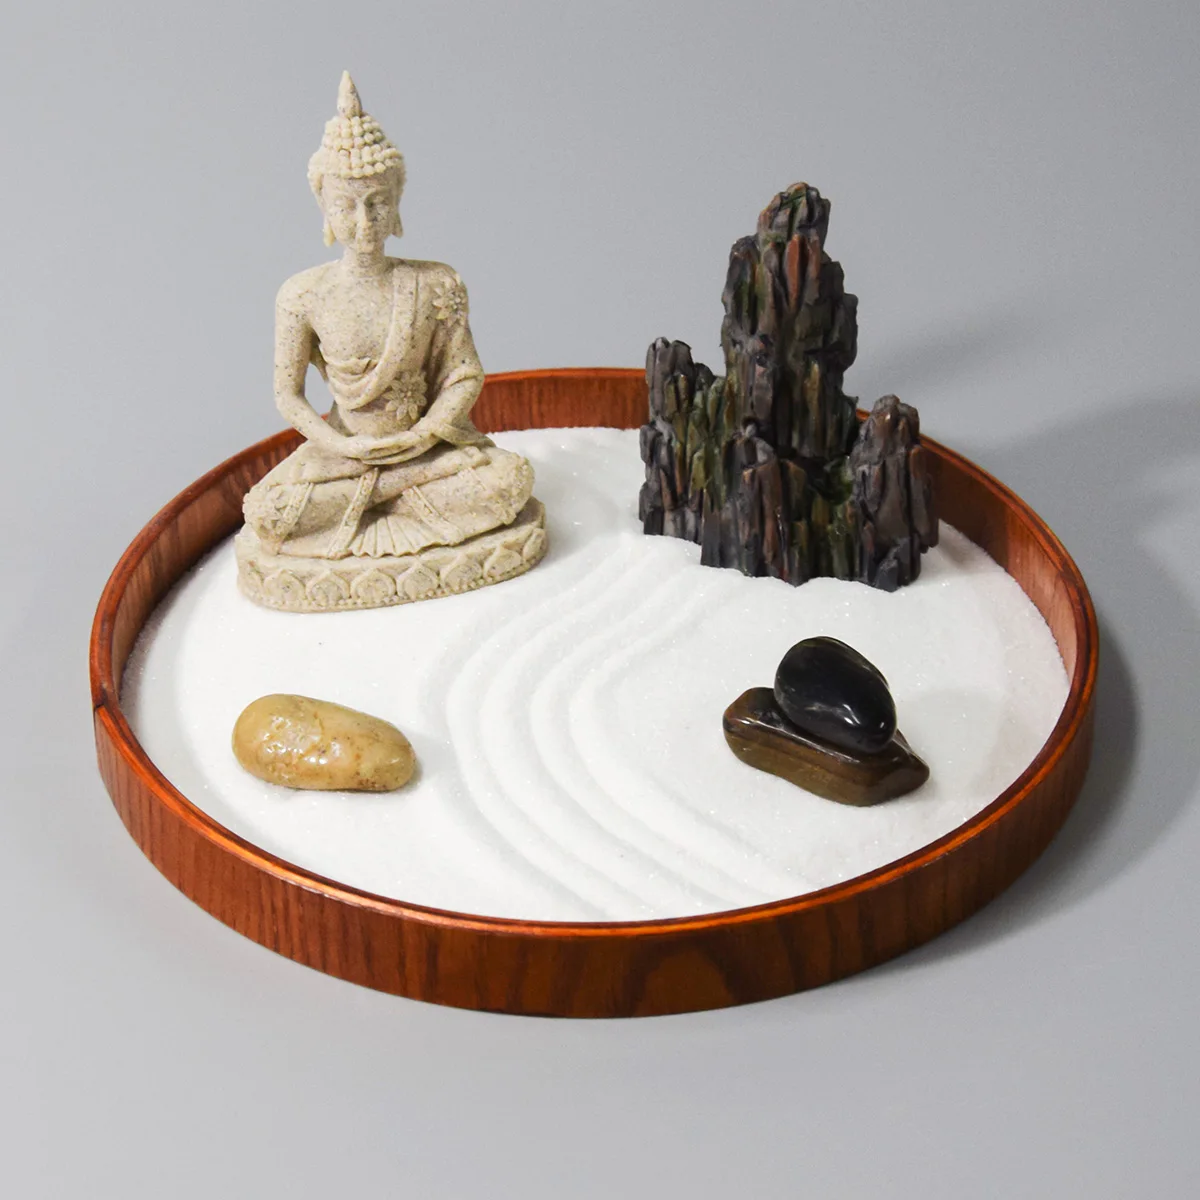 ICNBUYS Mini Zen Garden Classic with Free Rake Bamboo Pen Pushing Sand Pen Zen Garden Drawing Guild and Selected River Stones Well Packaged Gift Base Tray Dimensions 10 x 7 inches 